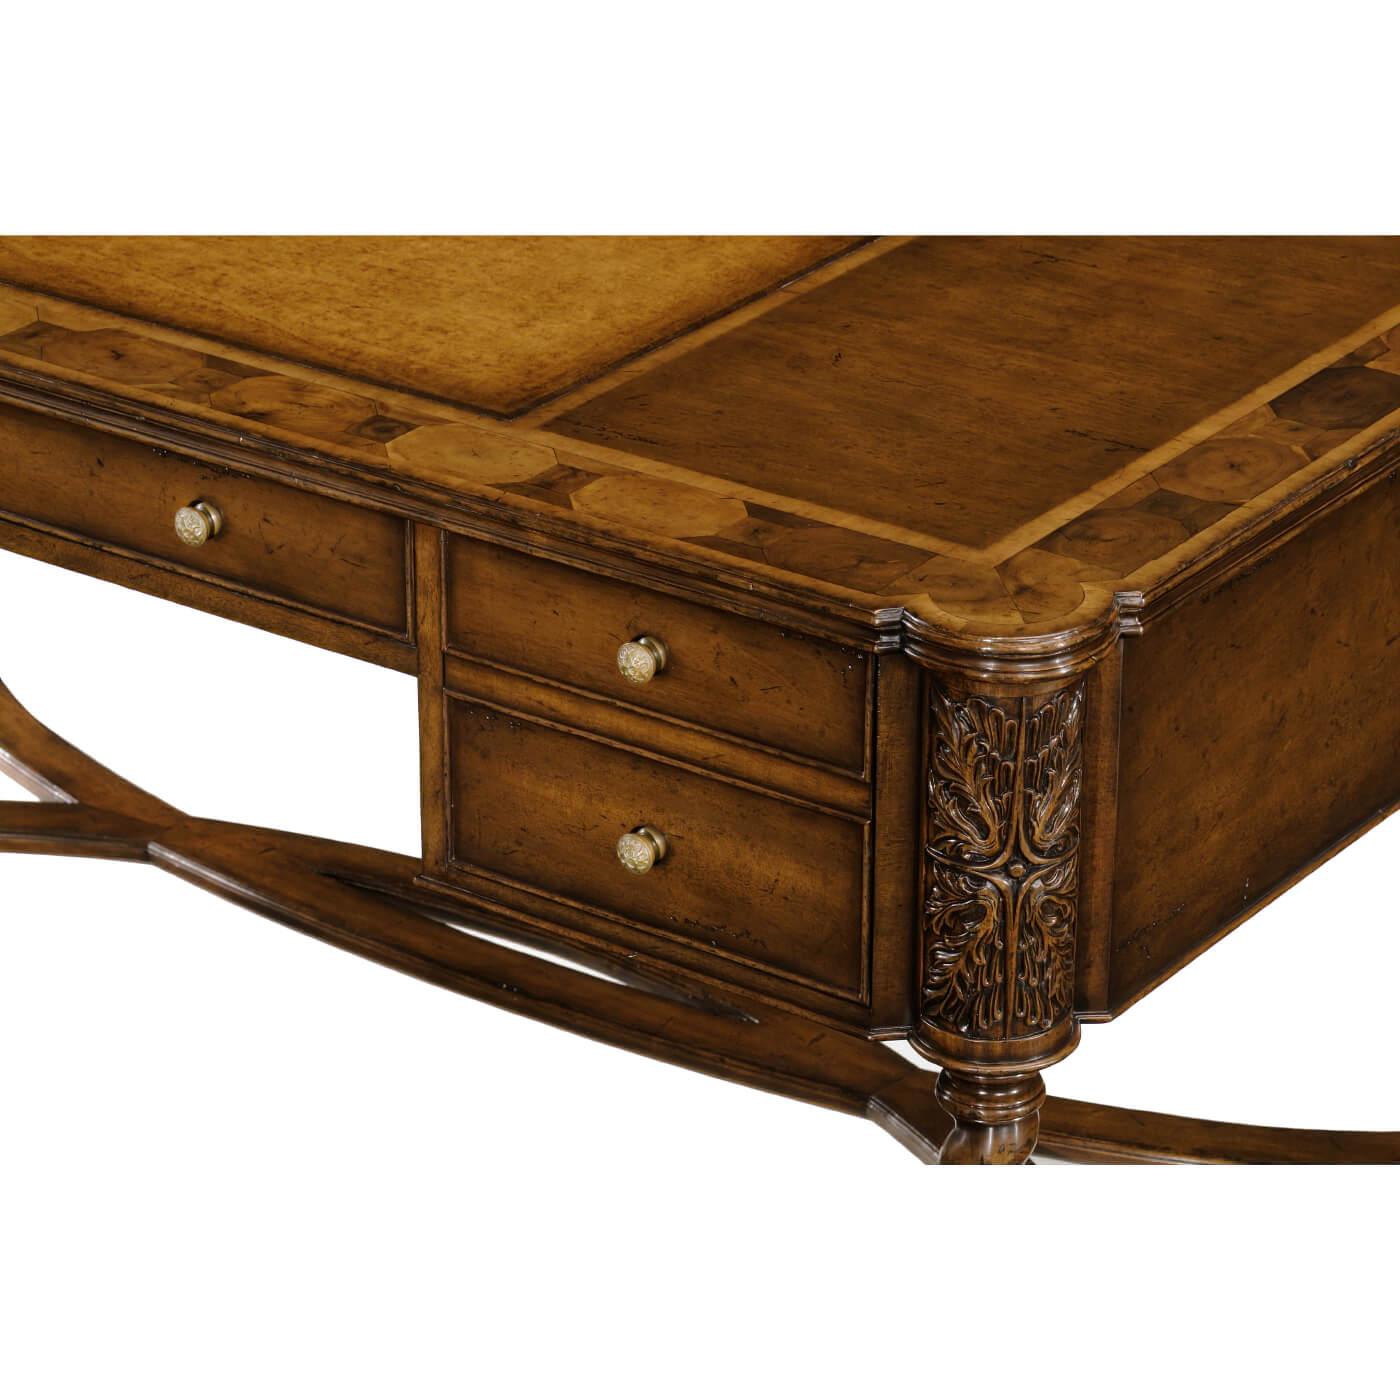 European William and Mary Style Desk